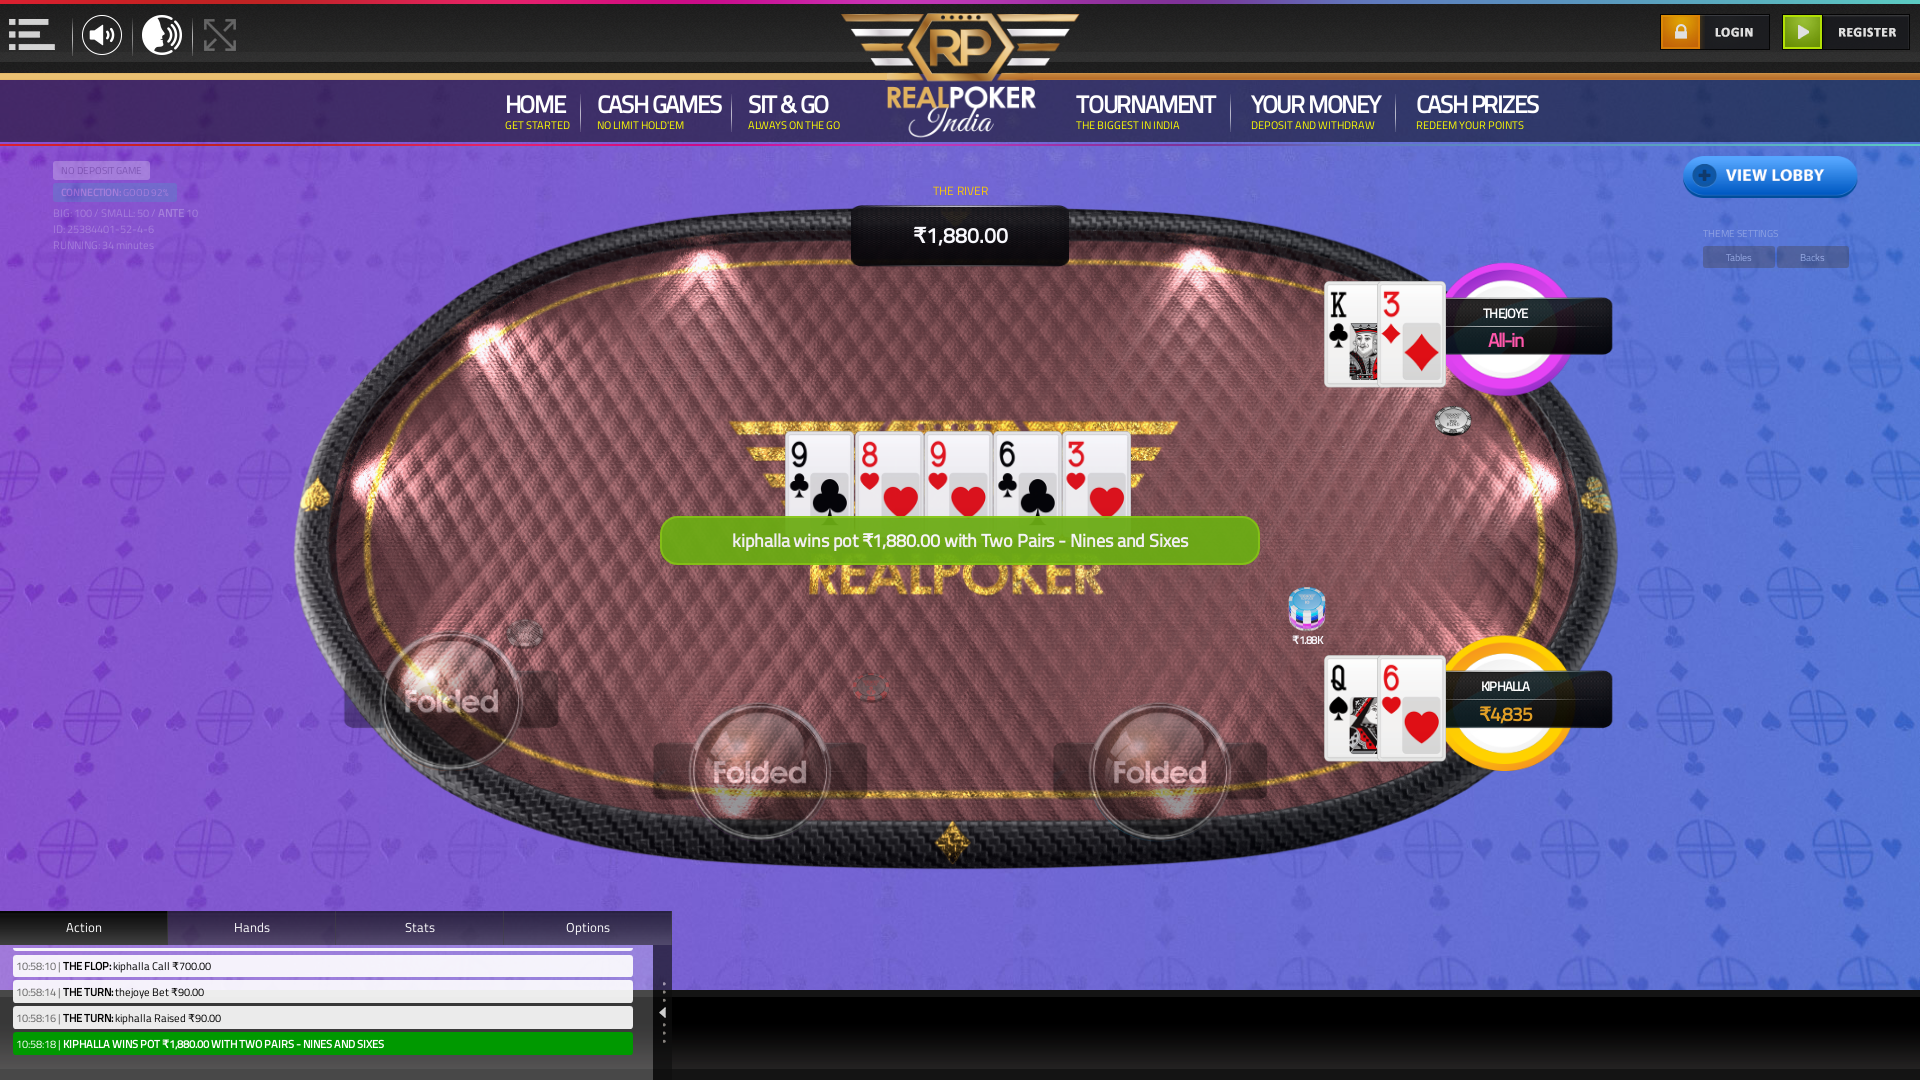 Horamavu, Bangalore texas holdem poker table on a 10 player table in the 34th minute of the match